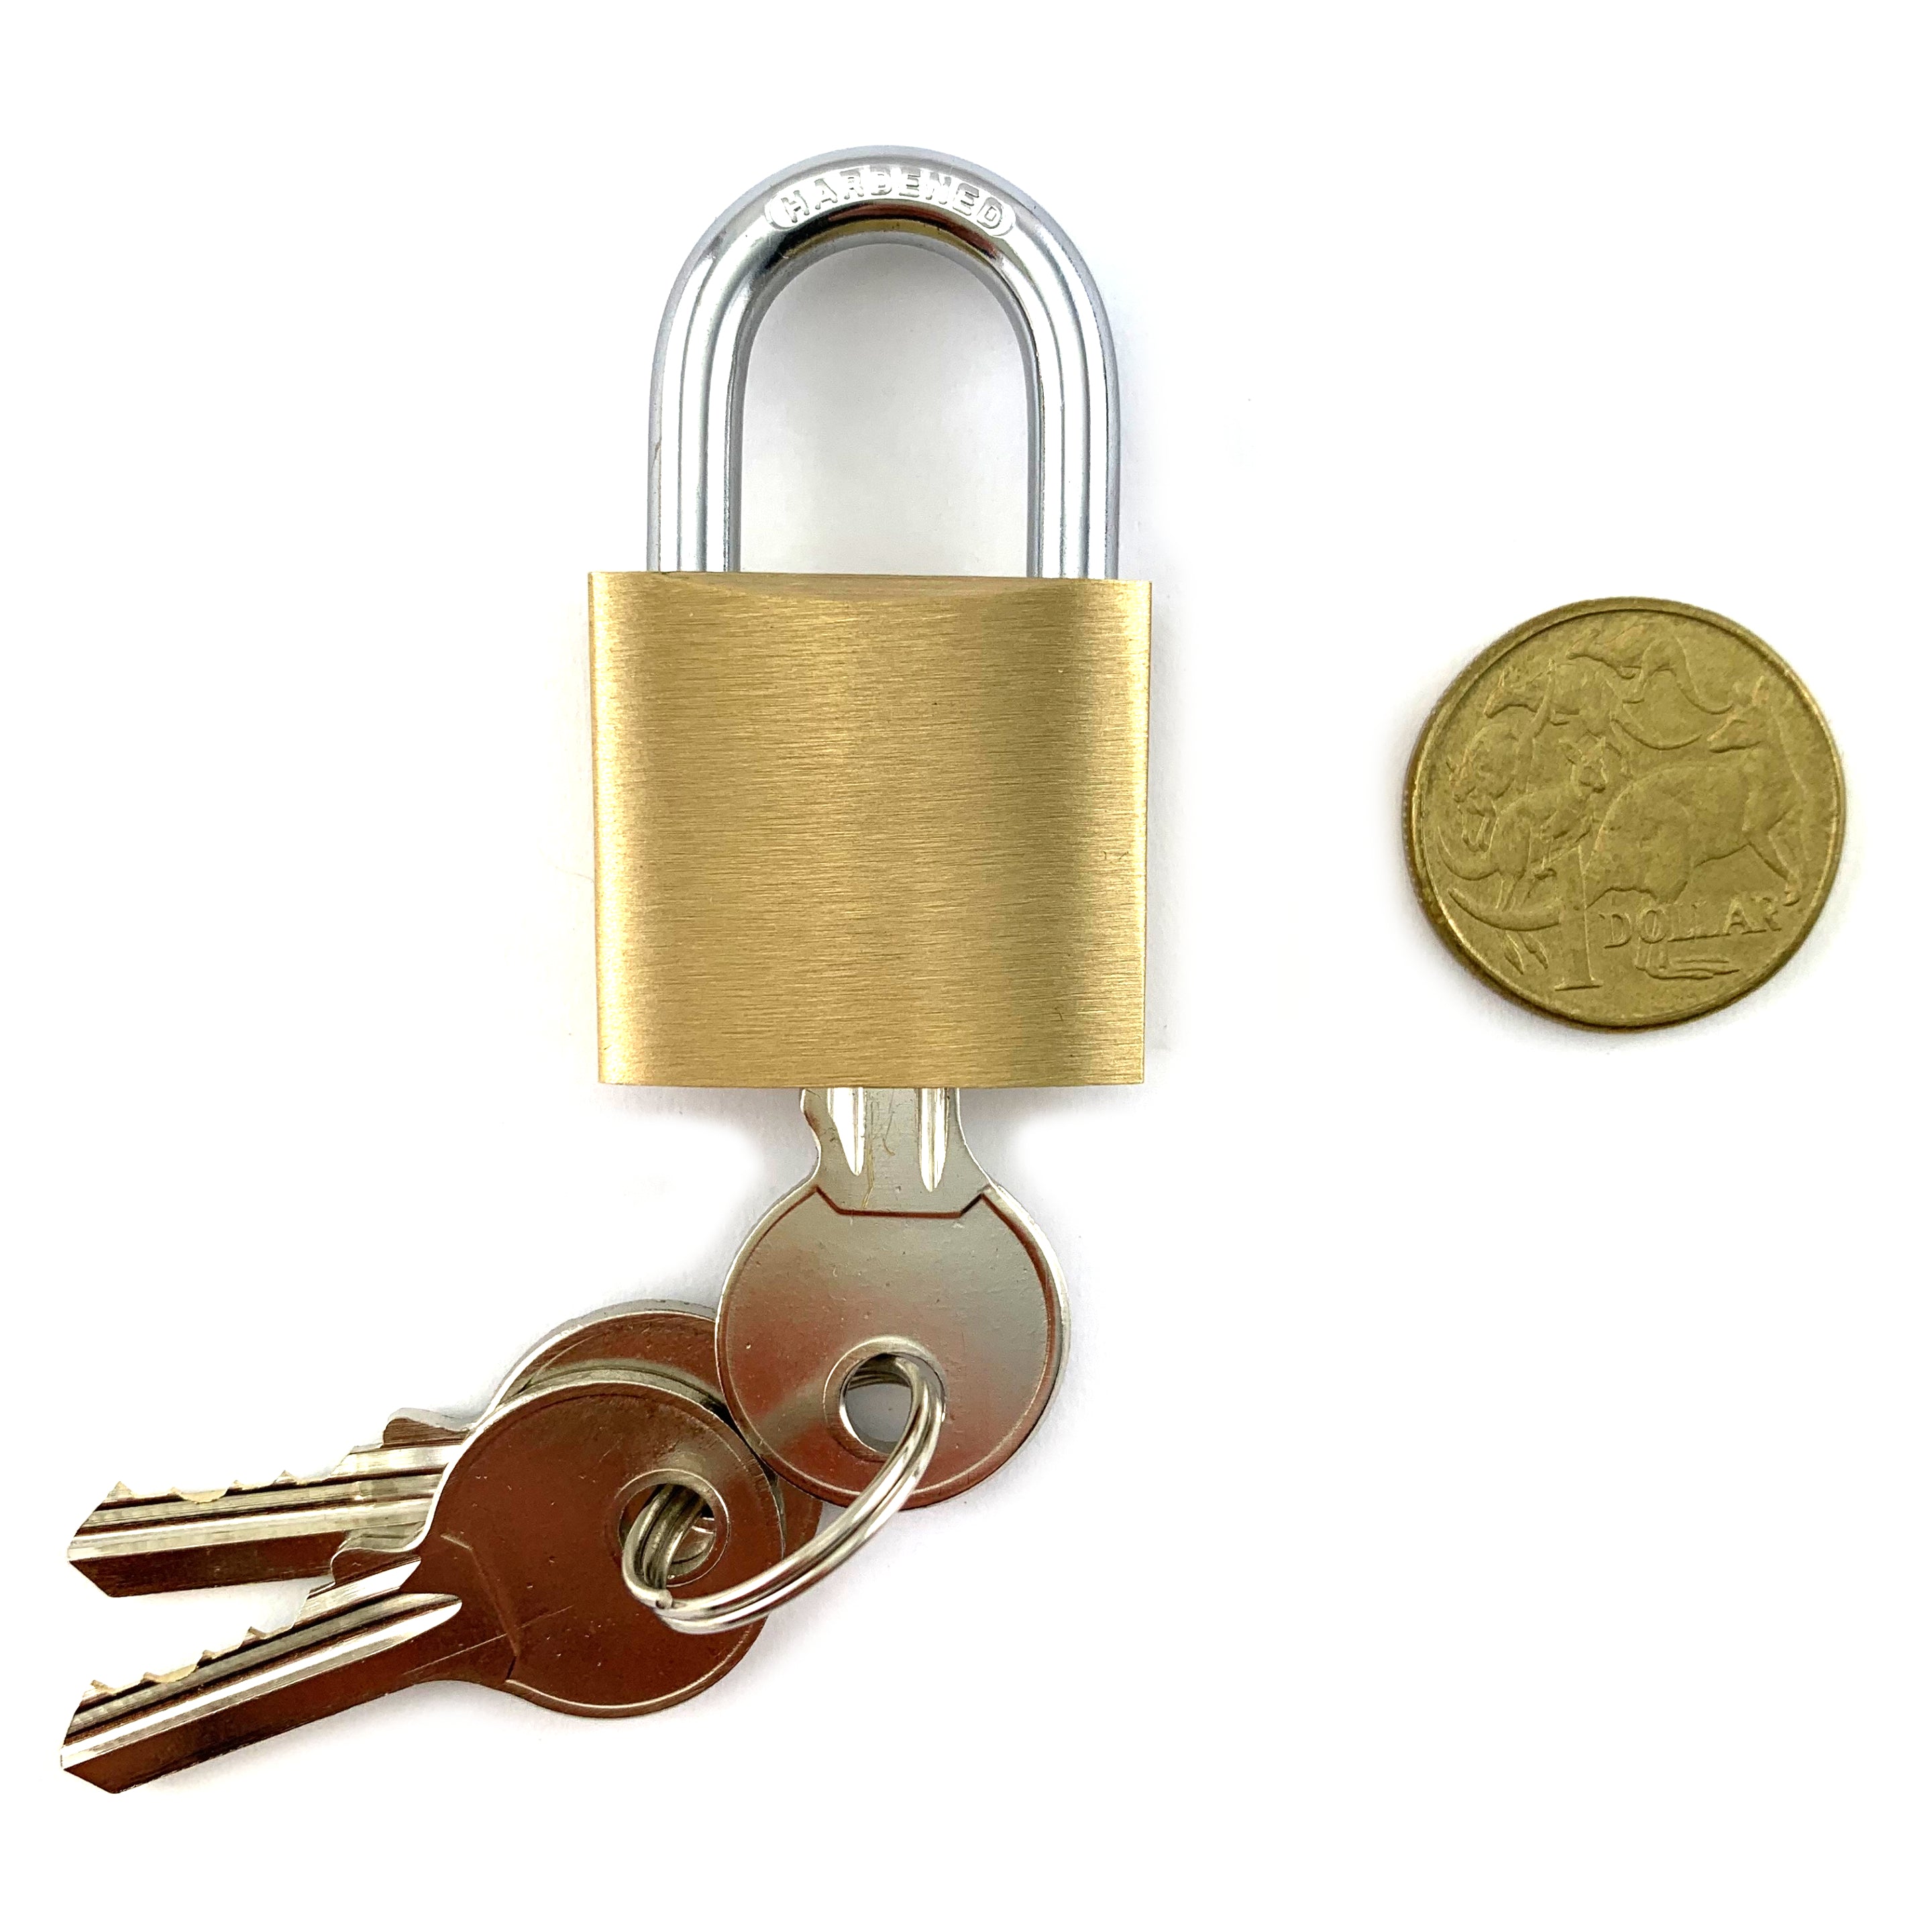 Brass and Hardened Steel Padlock, Small size, 5mm shackle. Australia wide delivery.